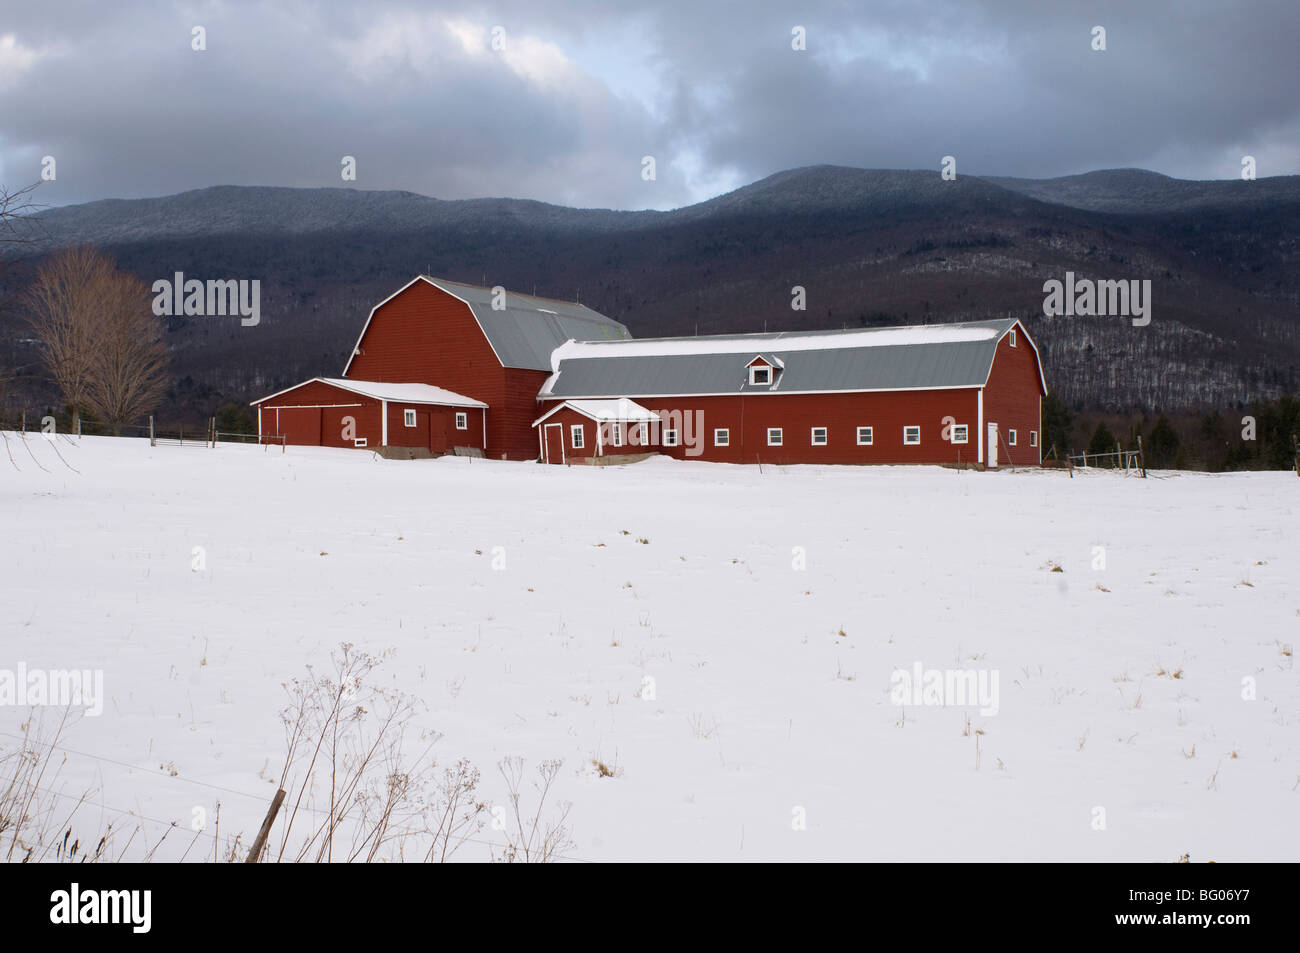 A traditional red painted barn surrounded by snow and the Green Mountains in the background, Vermont, New England, USA Stock Photo